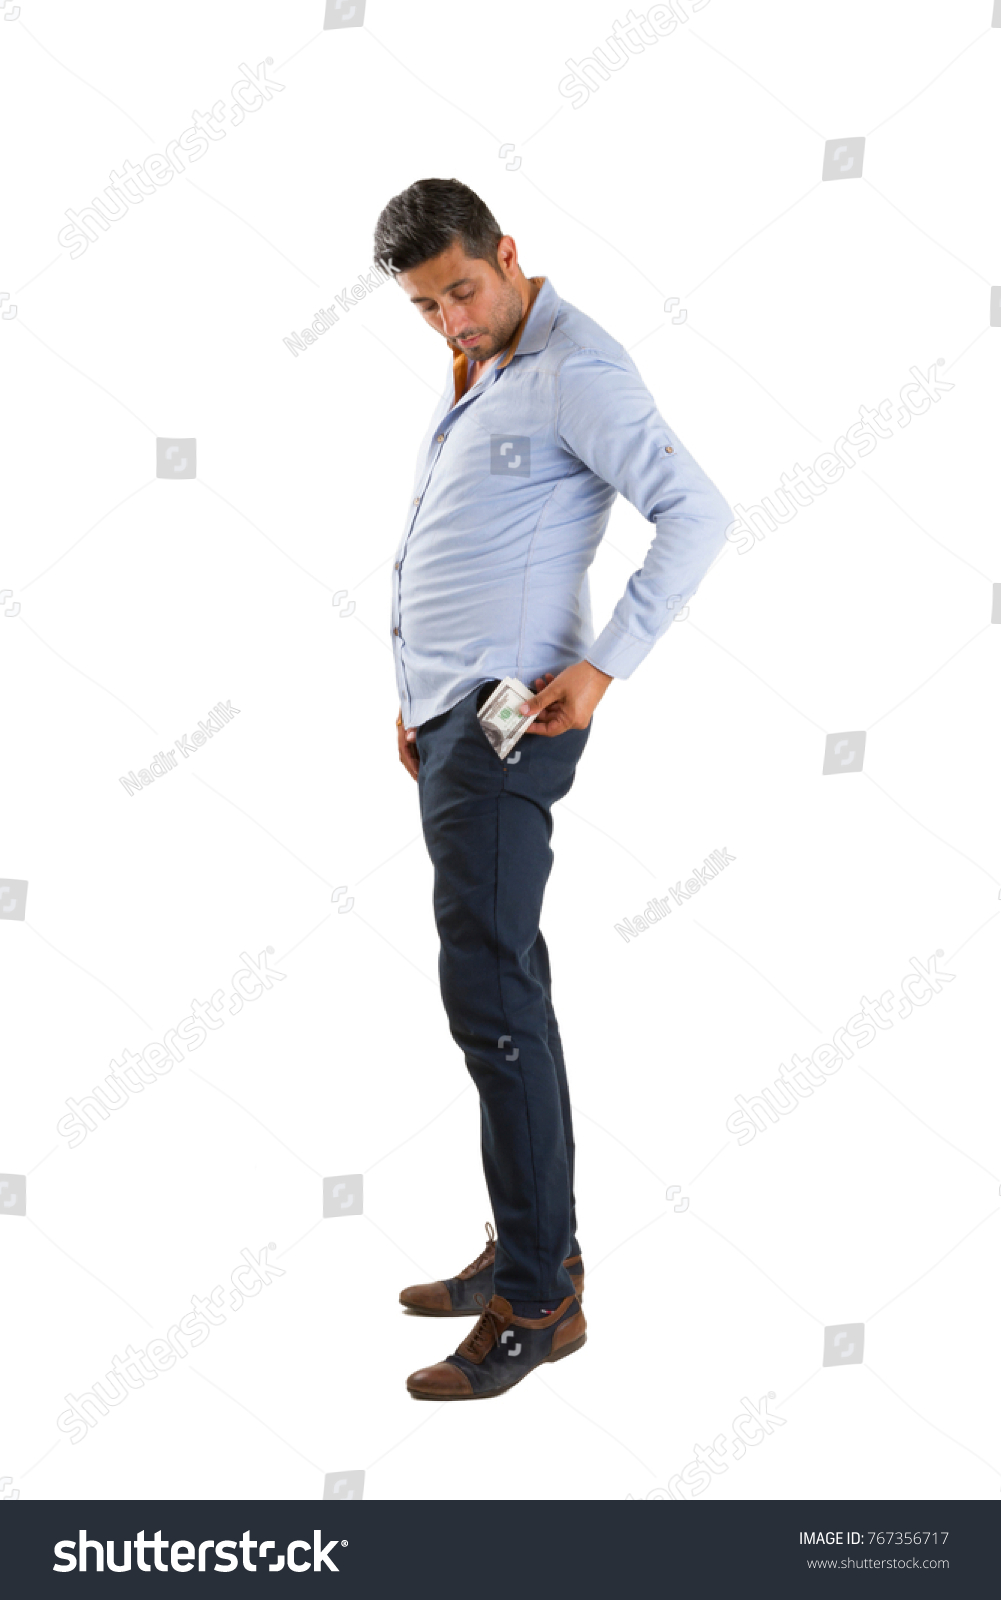 Black short hair young caucasian guy with blue shirt, blue casual pants and brown shoes counting usa dollar money isolated on white background.  #767356717